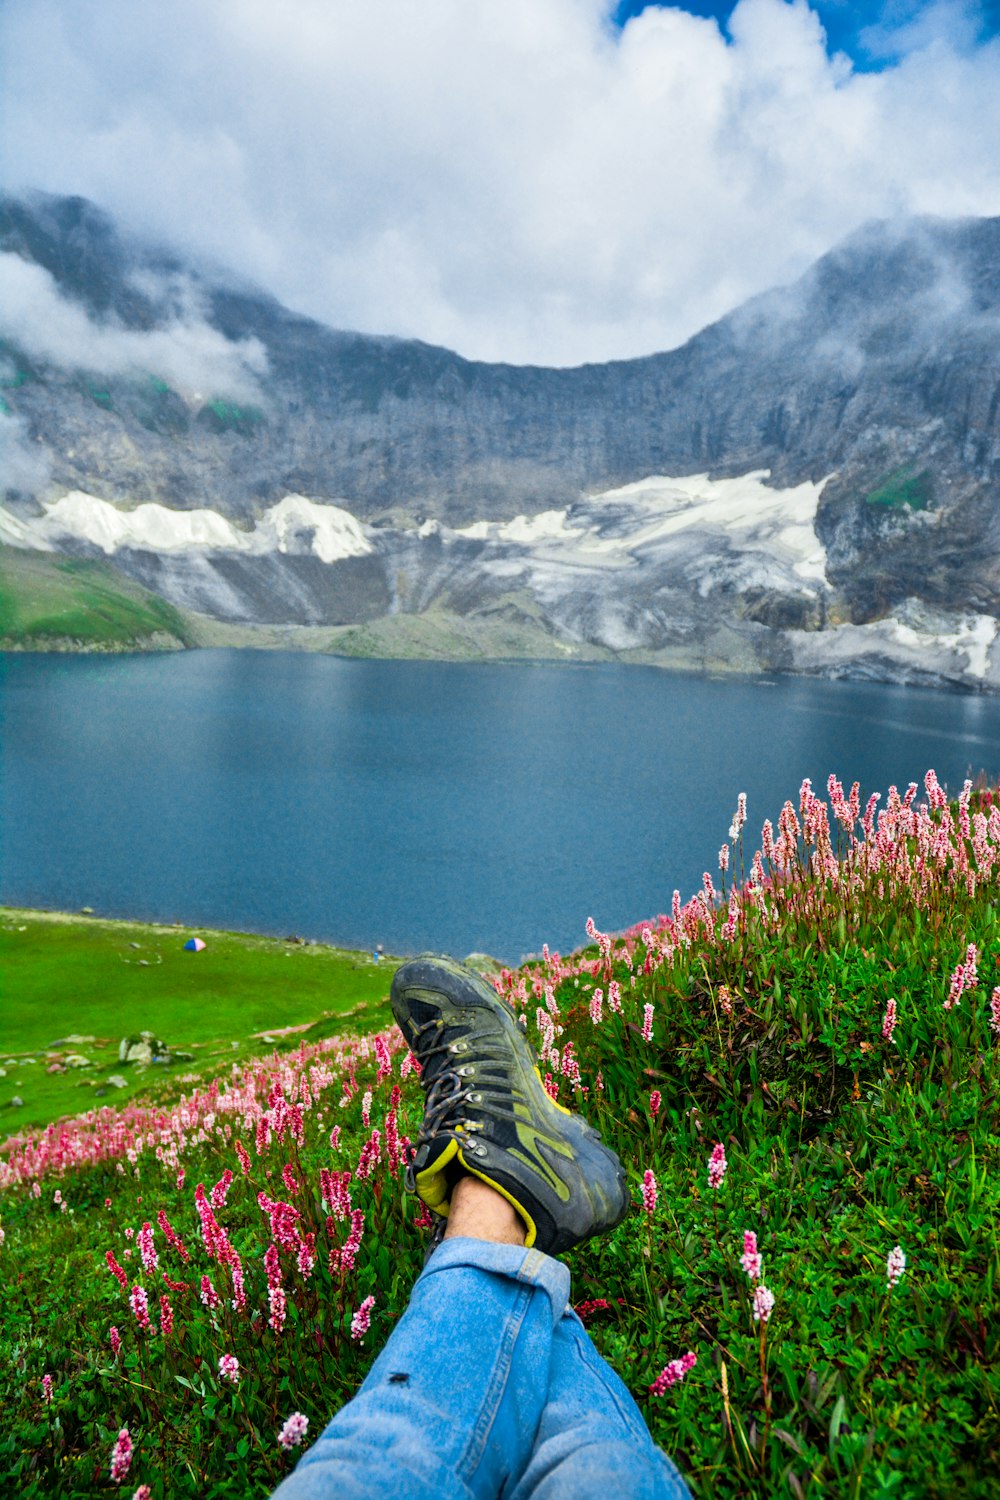 a person's feet on a grassy hill overlooking a lake